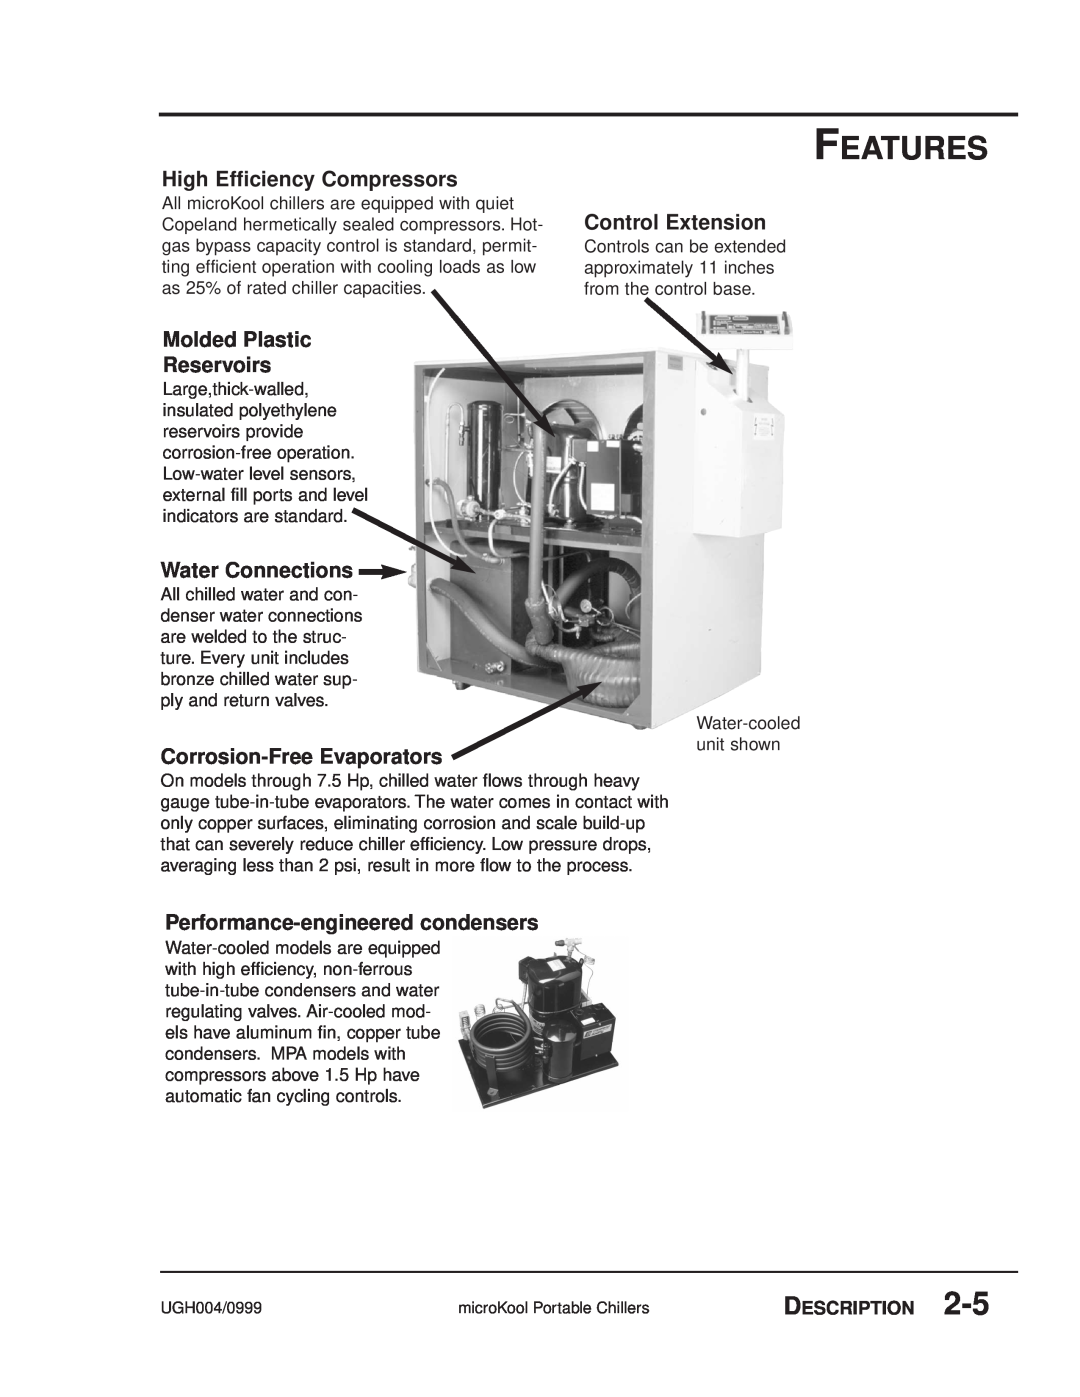 Conair MPW Features, High Efficiency Compressors, Molded Plastic Reservoirs, Water Connections, Corrosion-Free Evaporators 